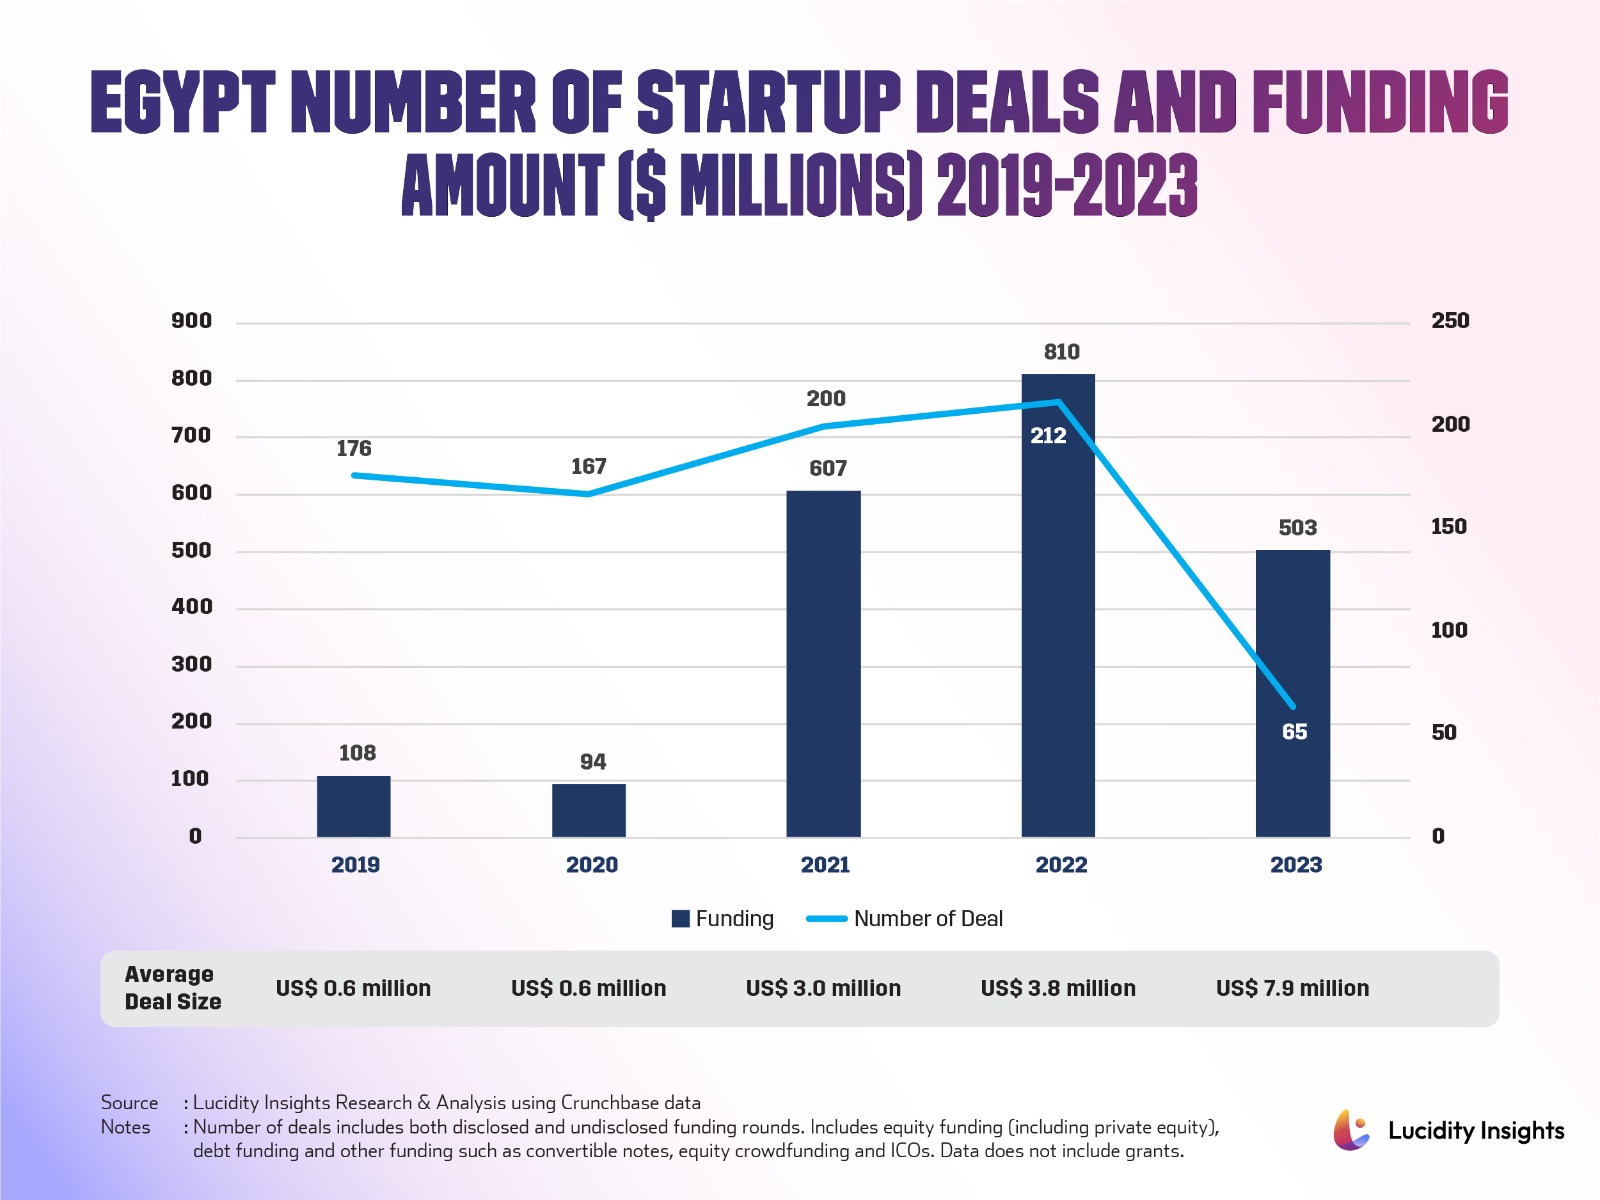 Egypt Number of Startup Deals and Funding Amount (In Millions USD) 2019-2023